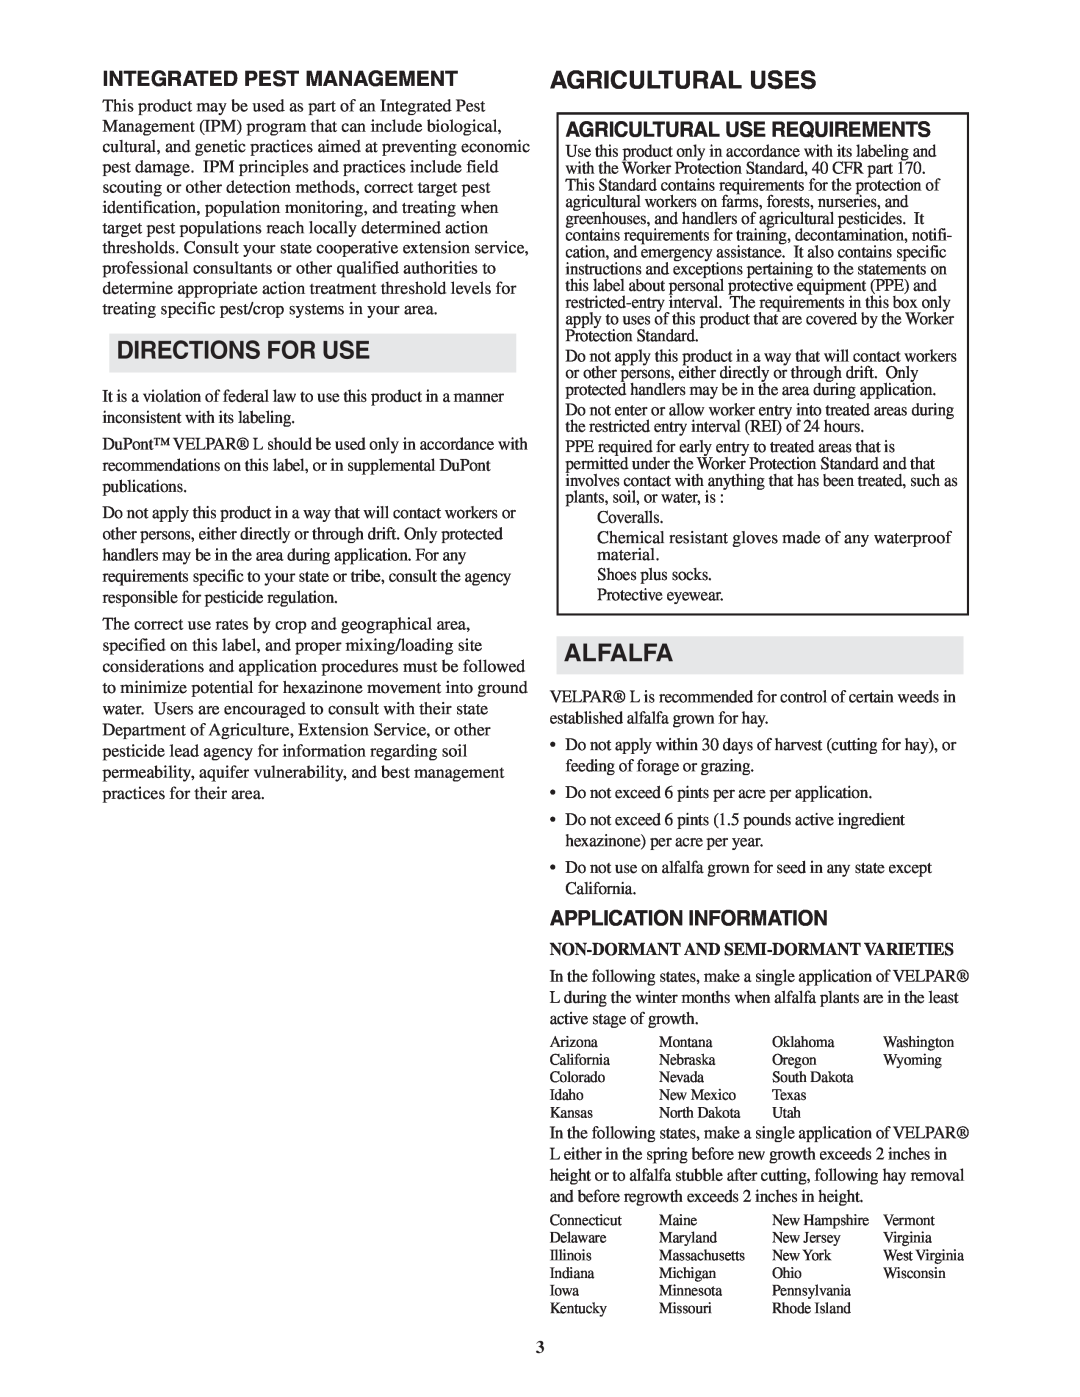 DuPont Authentication H - 65396 manual Directions For Use, Agricultural Uses, Alfalfa, Integrated Pest Management 